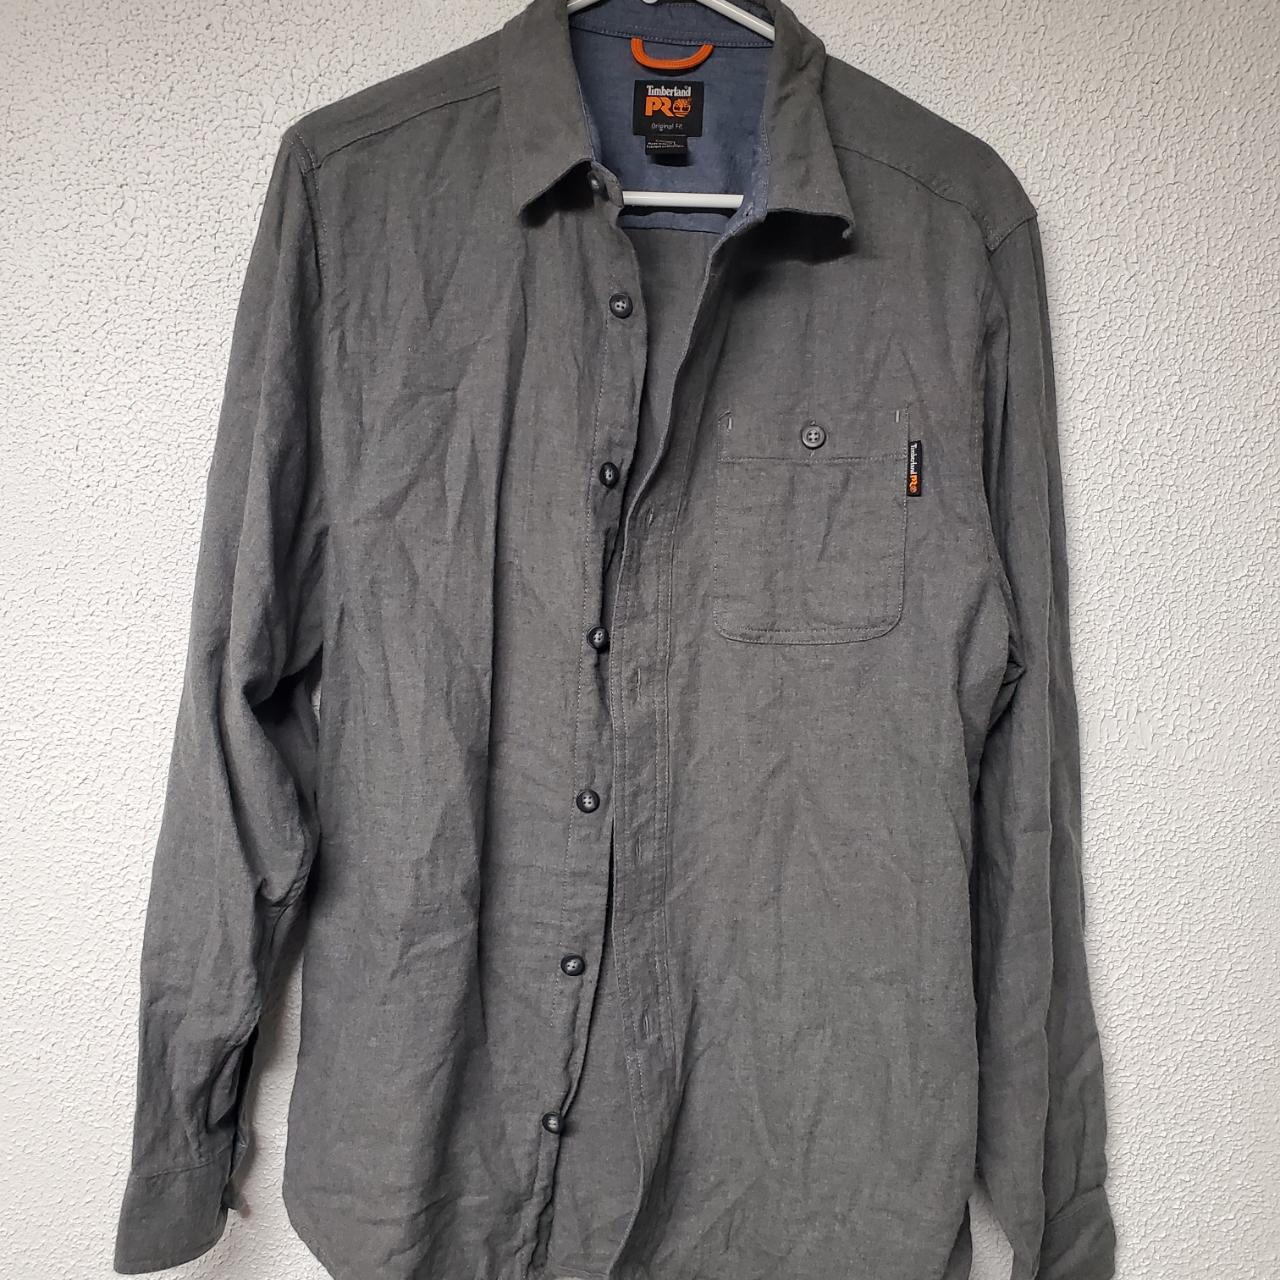 This Timberland shirt for men features a solid gray... - Depop